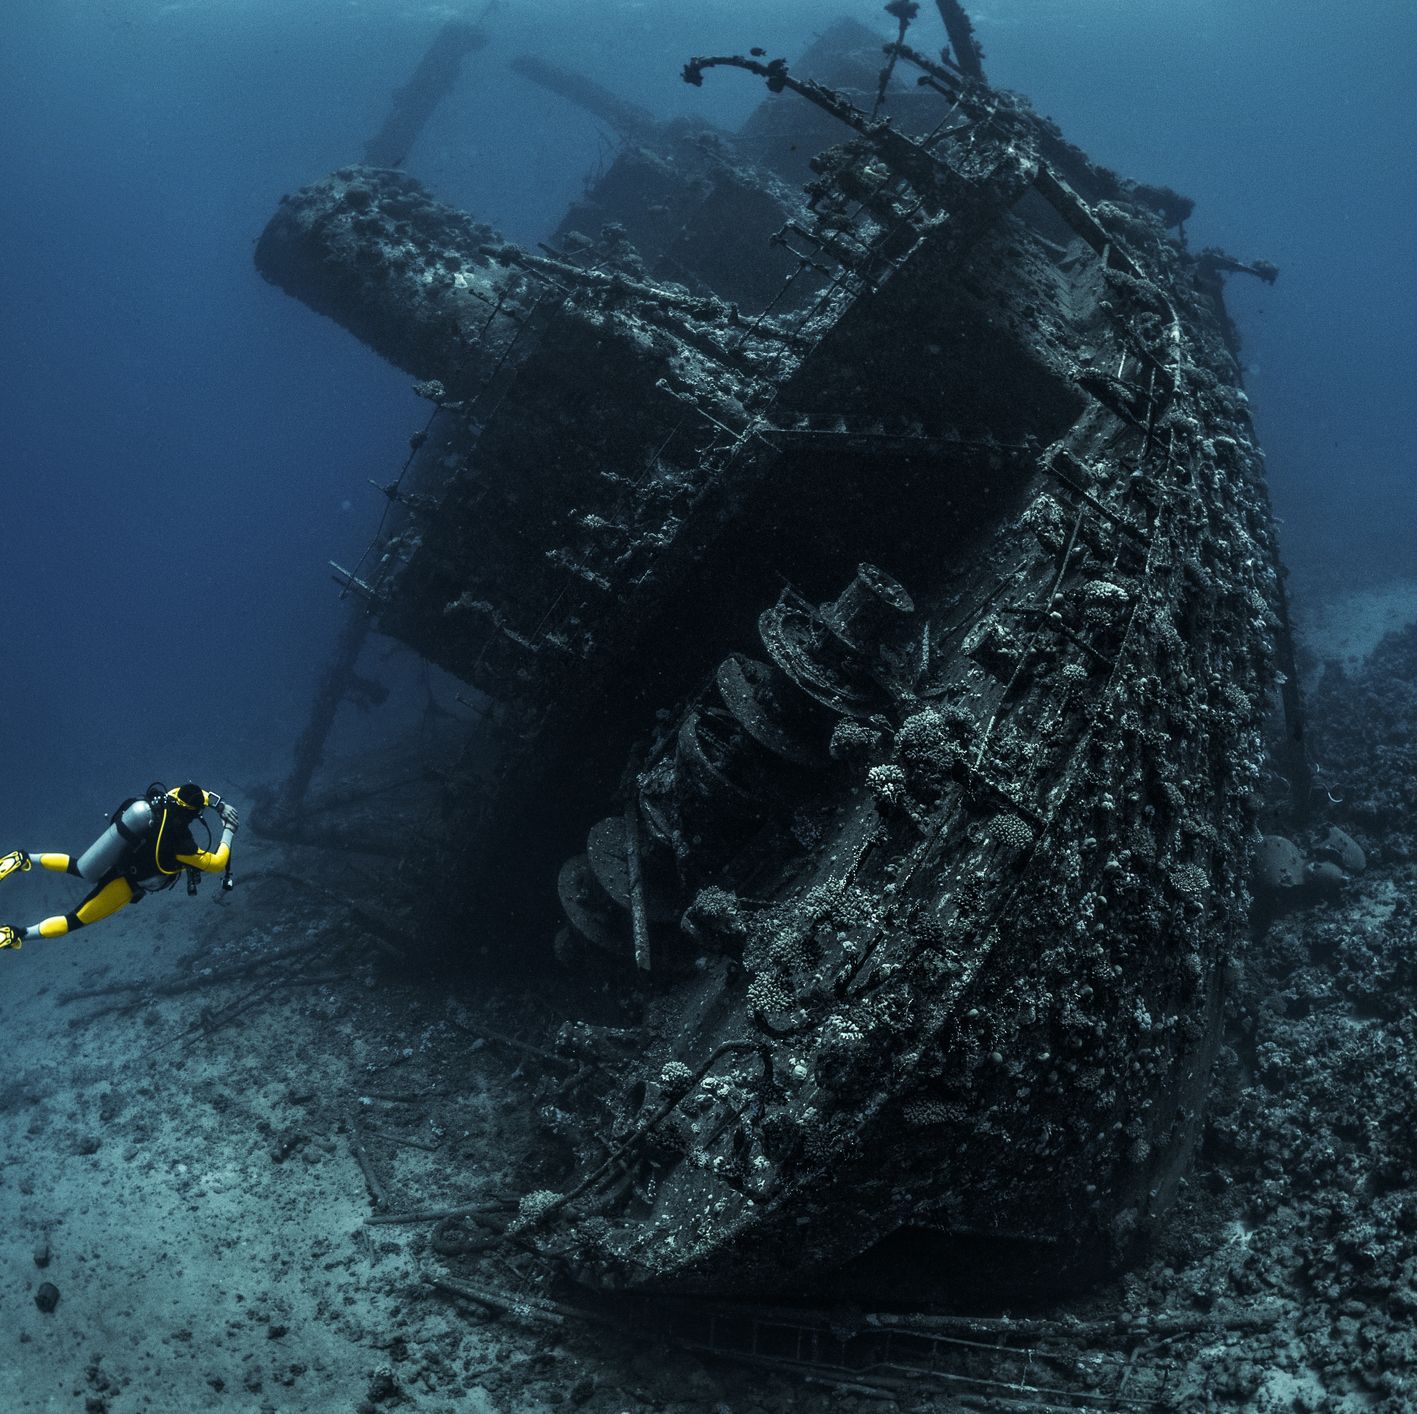 Why Some Shipwreck Treasures Disintegrate, While Others Stand the Test of Time